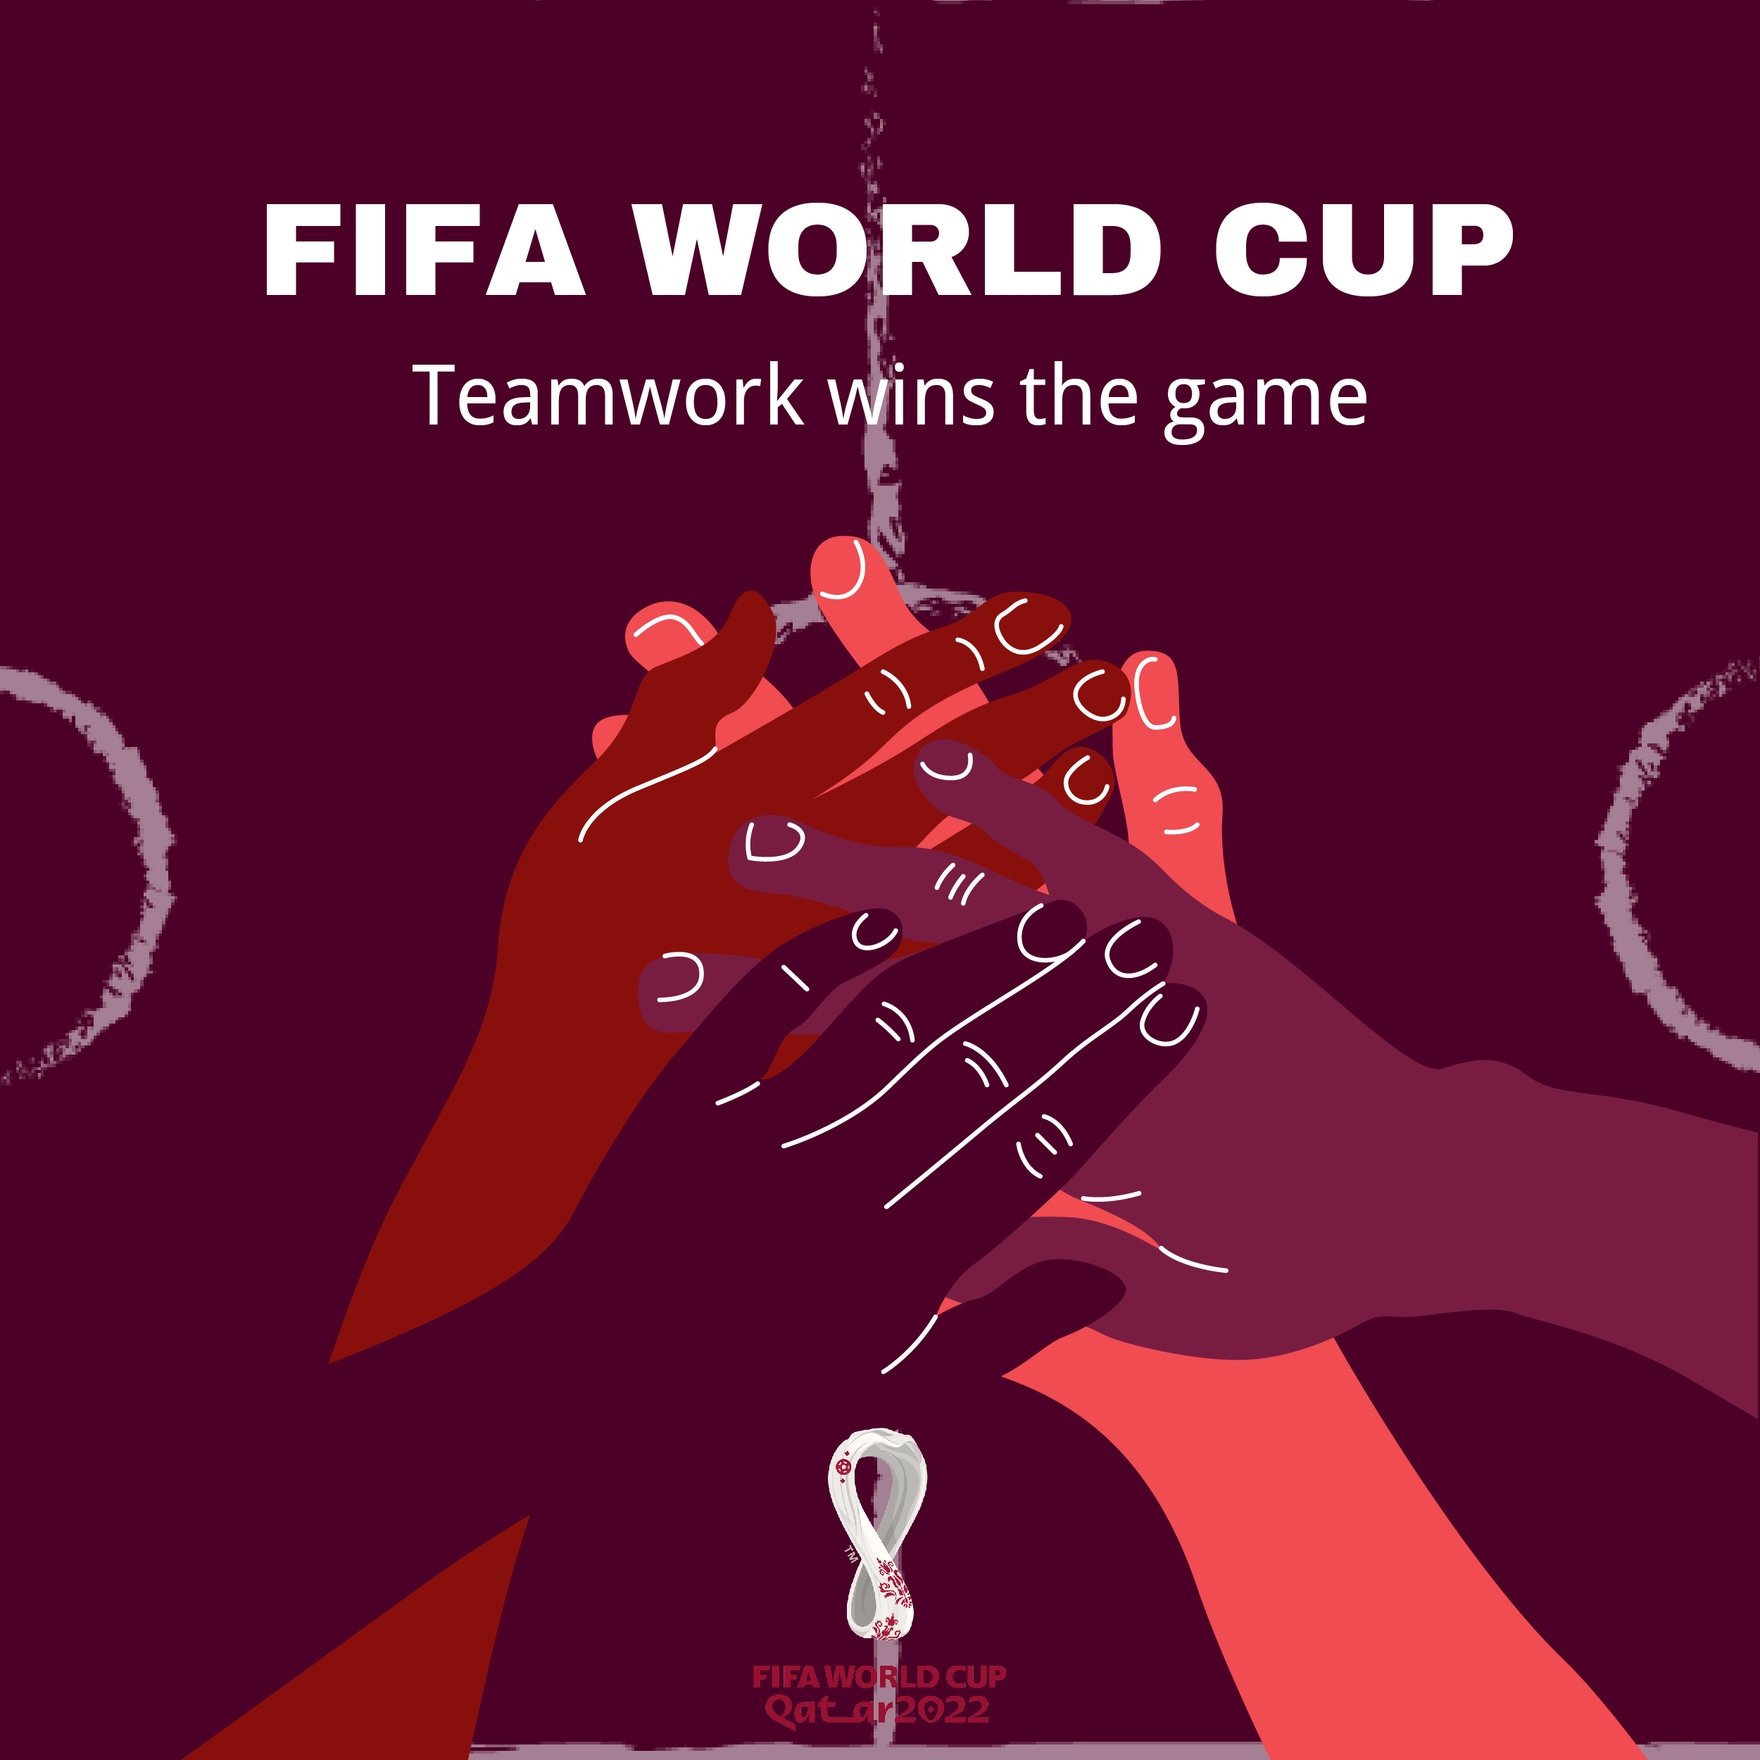 World Cup 2022 Whatsapp post in Illustrator, PSD, EPS, SVG, JPG, PNG